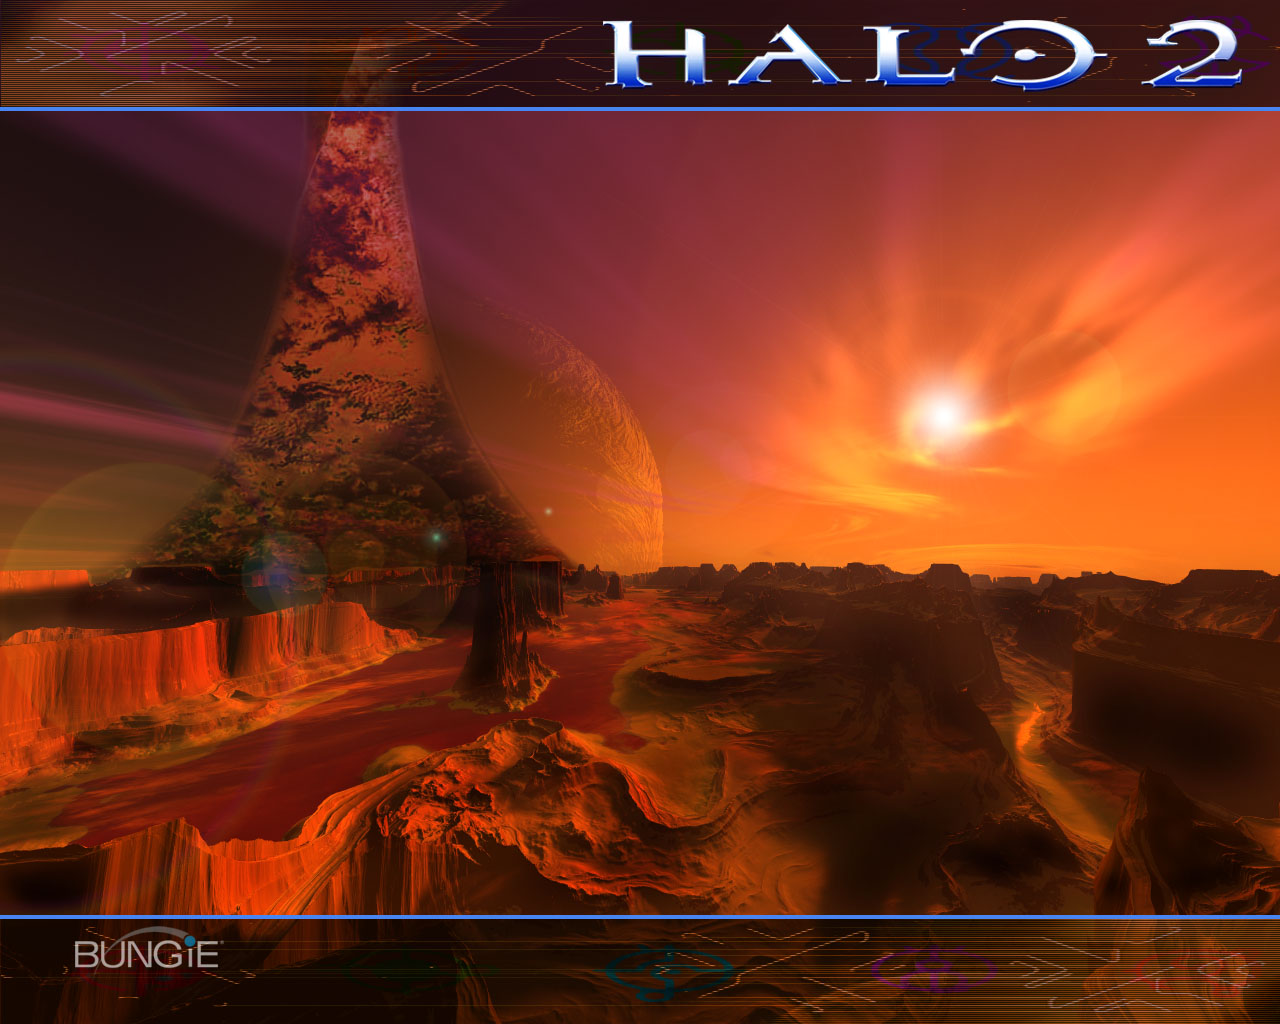 Halo Ce Wallpaper - Halo 4 Full Hd Wallpaper And Background Image ...